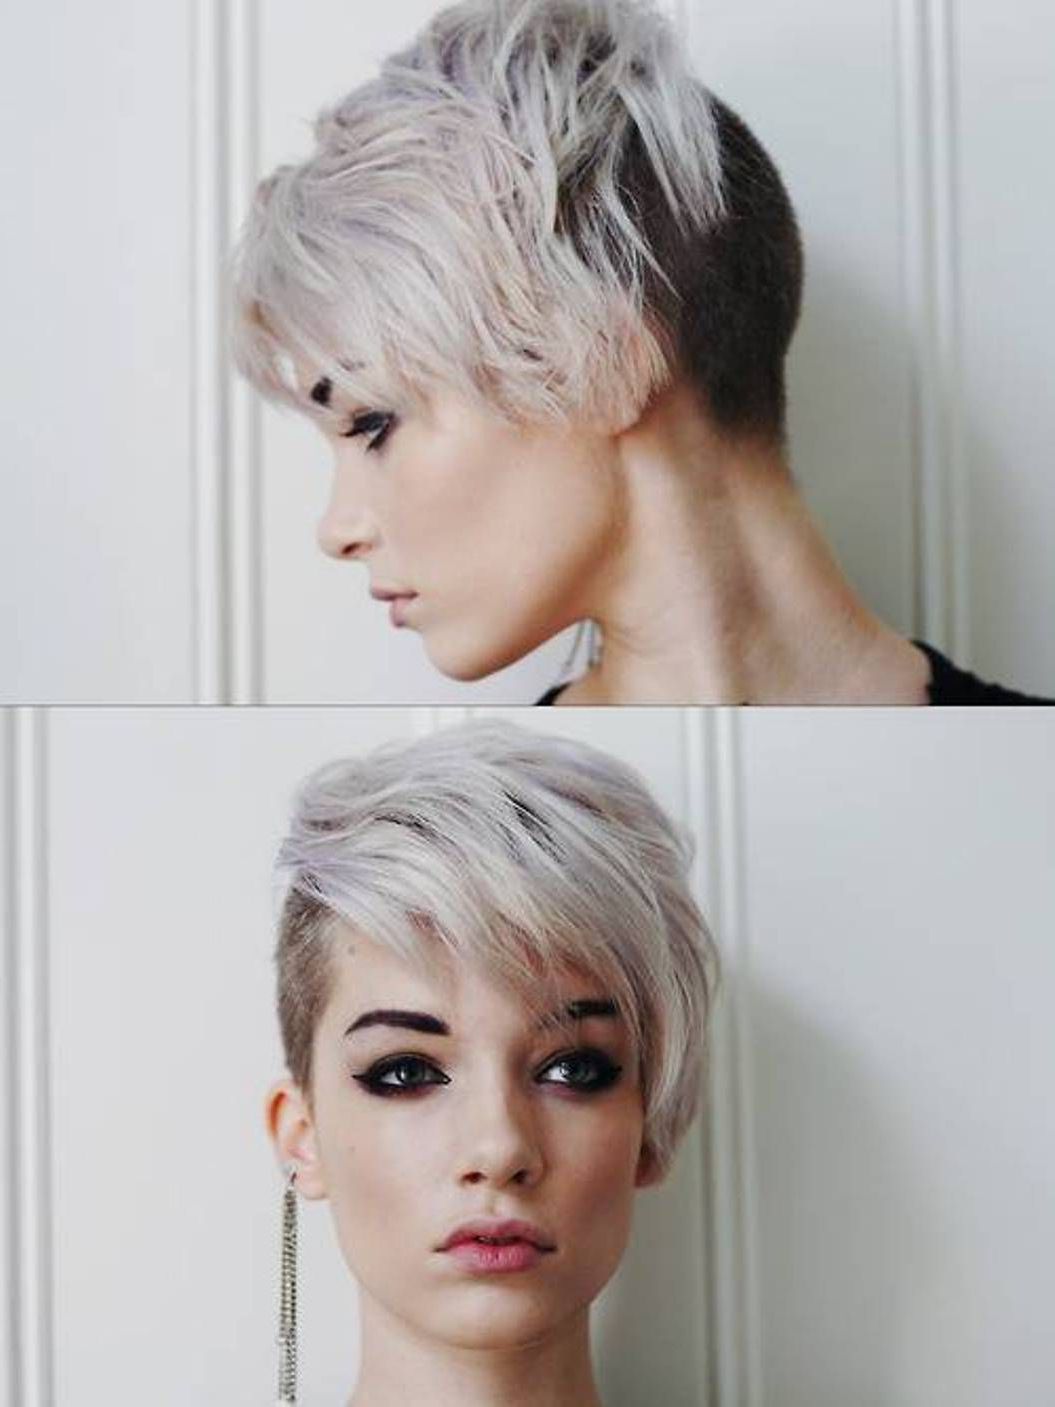 20 Shaved Hairstyles For Women | Hair | Pinterest | Hair, Short Hair In Short Hairstyles With Both Sides Shaved (Photo 1 of 25)